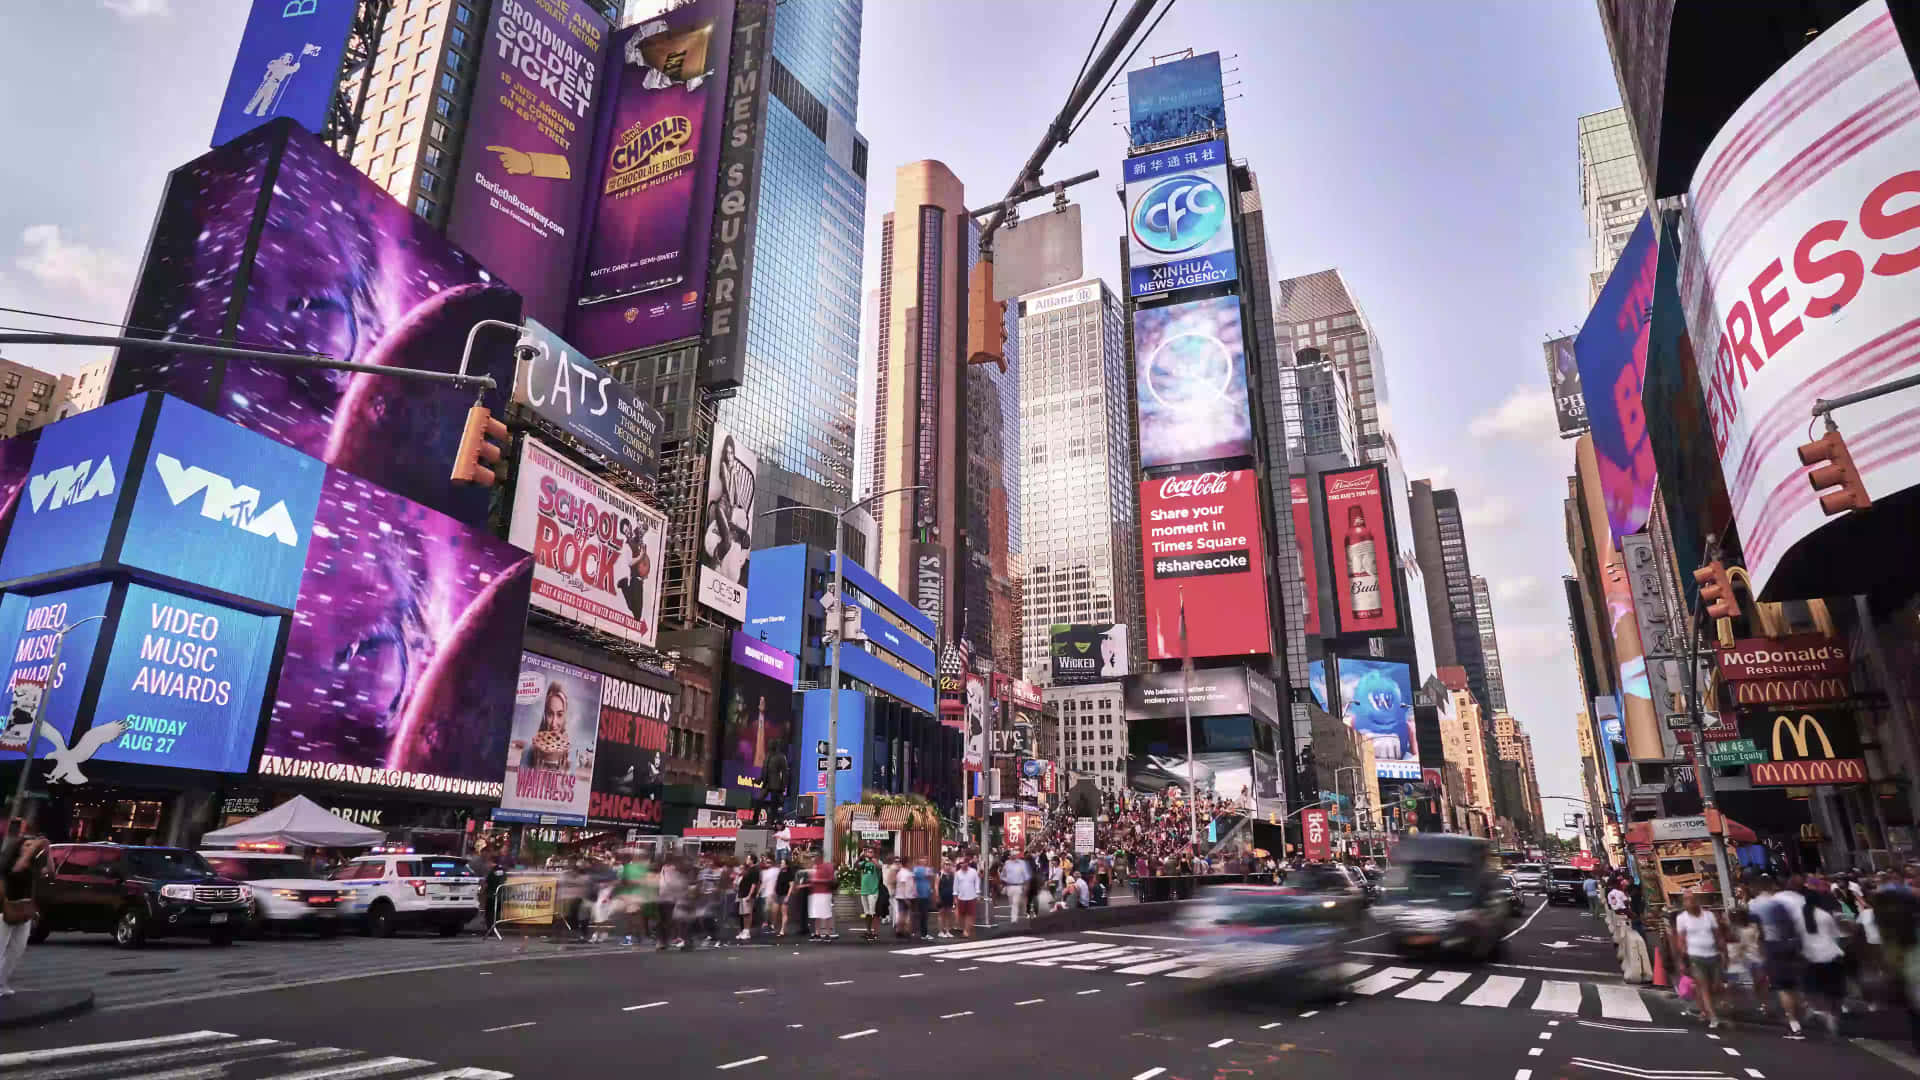 It's the City That Never Sleeps | Explore New York 24/7 in the Heart of Times Square Wallpaper